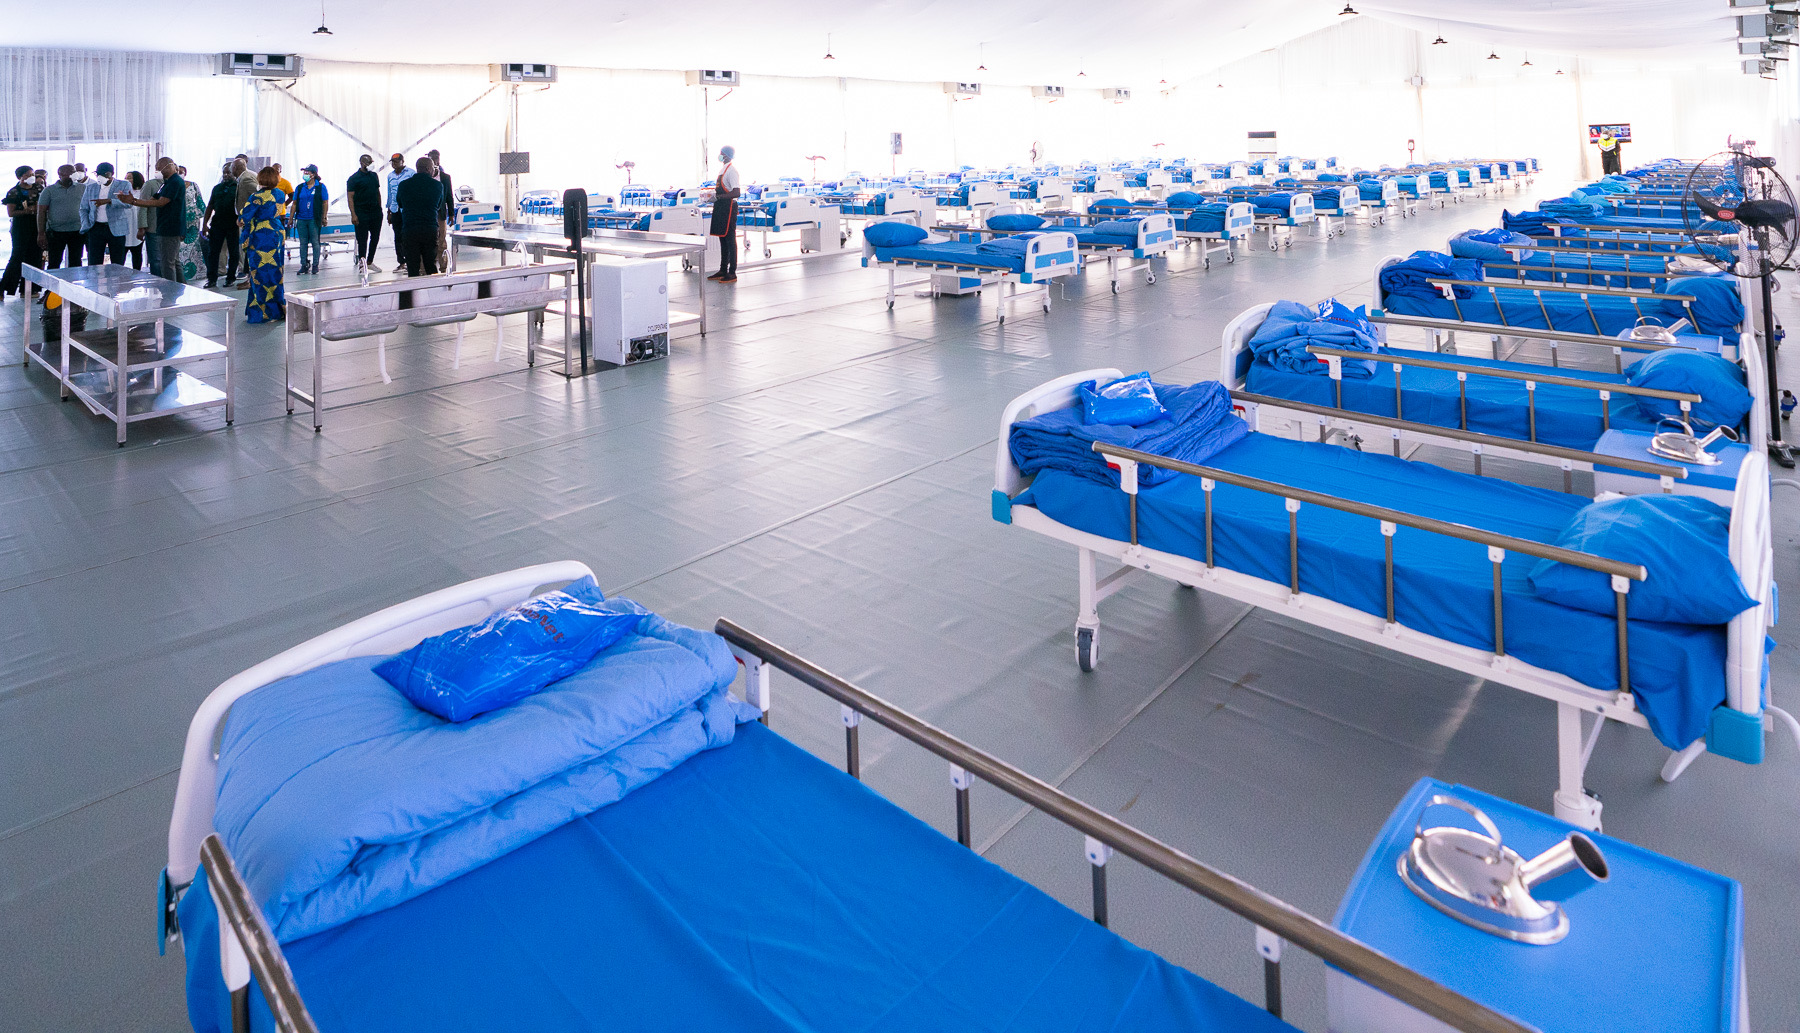 FG Targets 1000-Bed Space Isolation Centers In Abuja